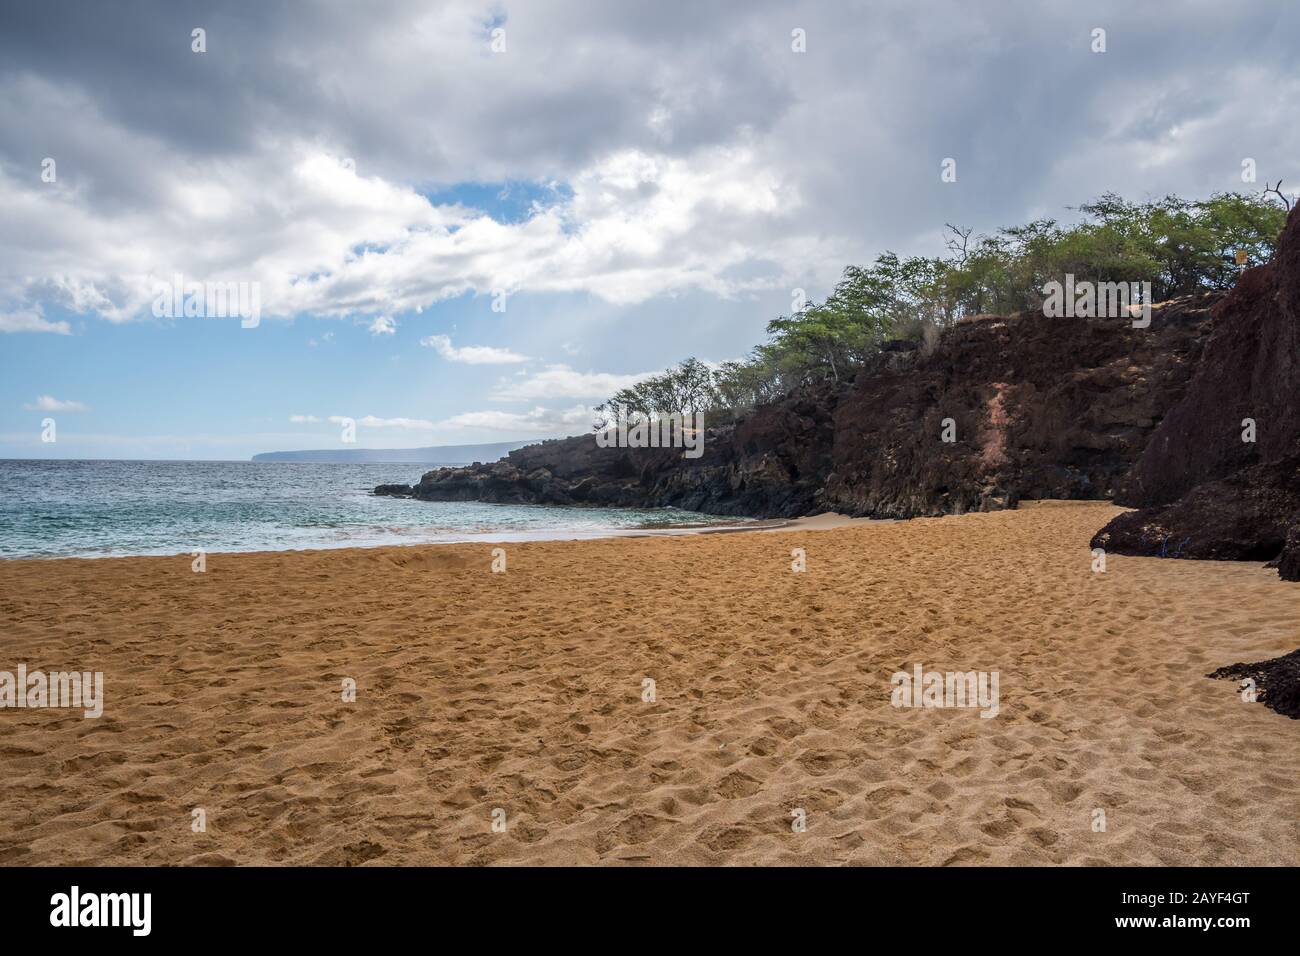 The overlooking view of the shore in Maui, Hawaii Stock Photo